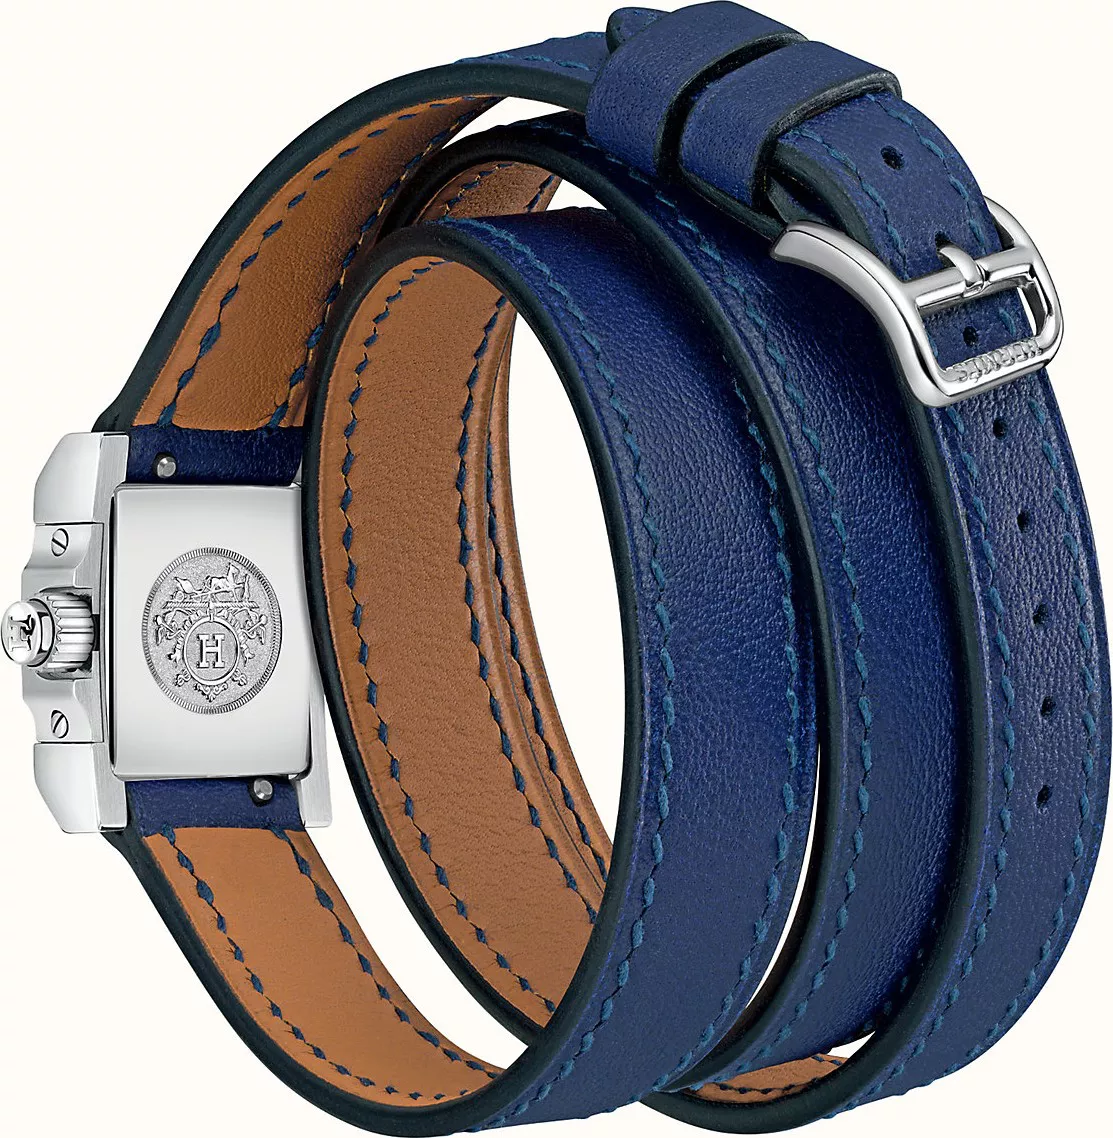 Hermes Medor Rock W046338WW00 Blue-lacquered Watch 16x16mm